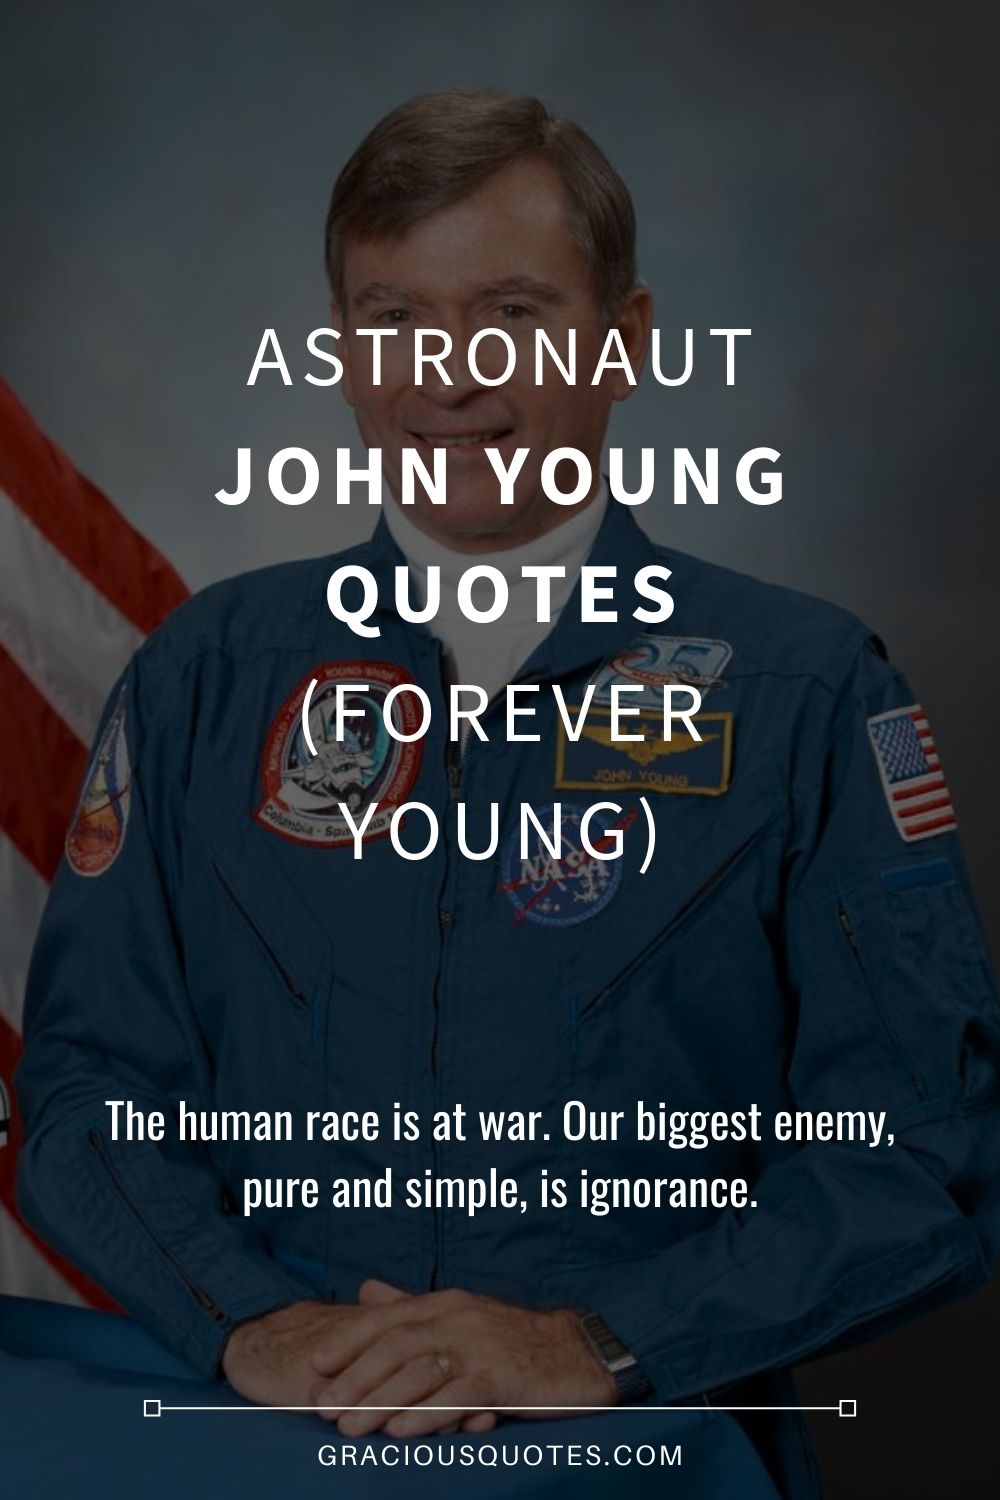 Astronaut John Young Quotes (FOREVER YOUNG) - Gracious Quotes